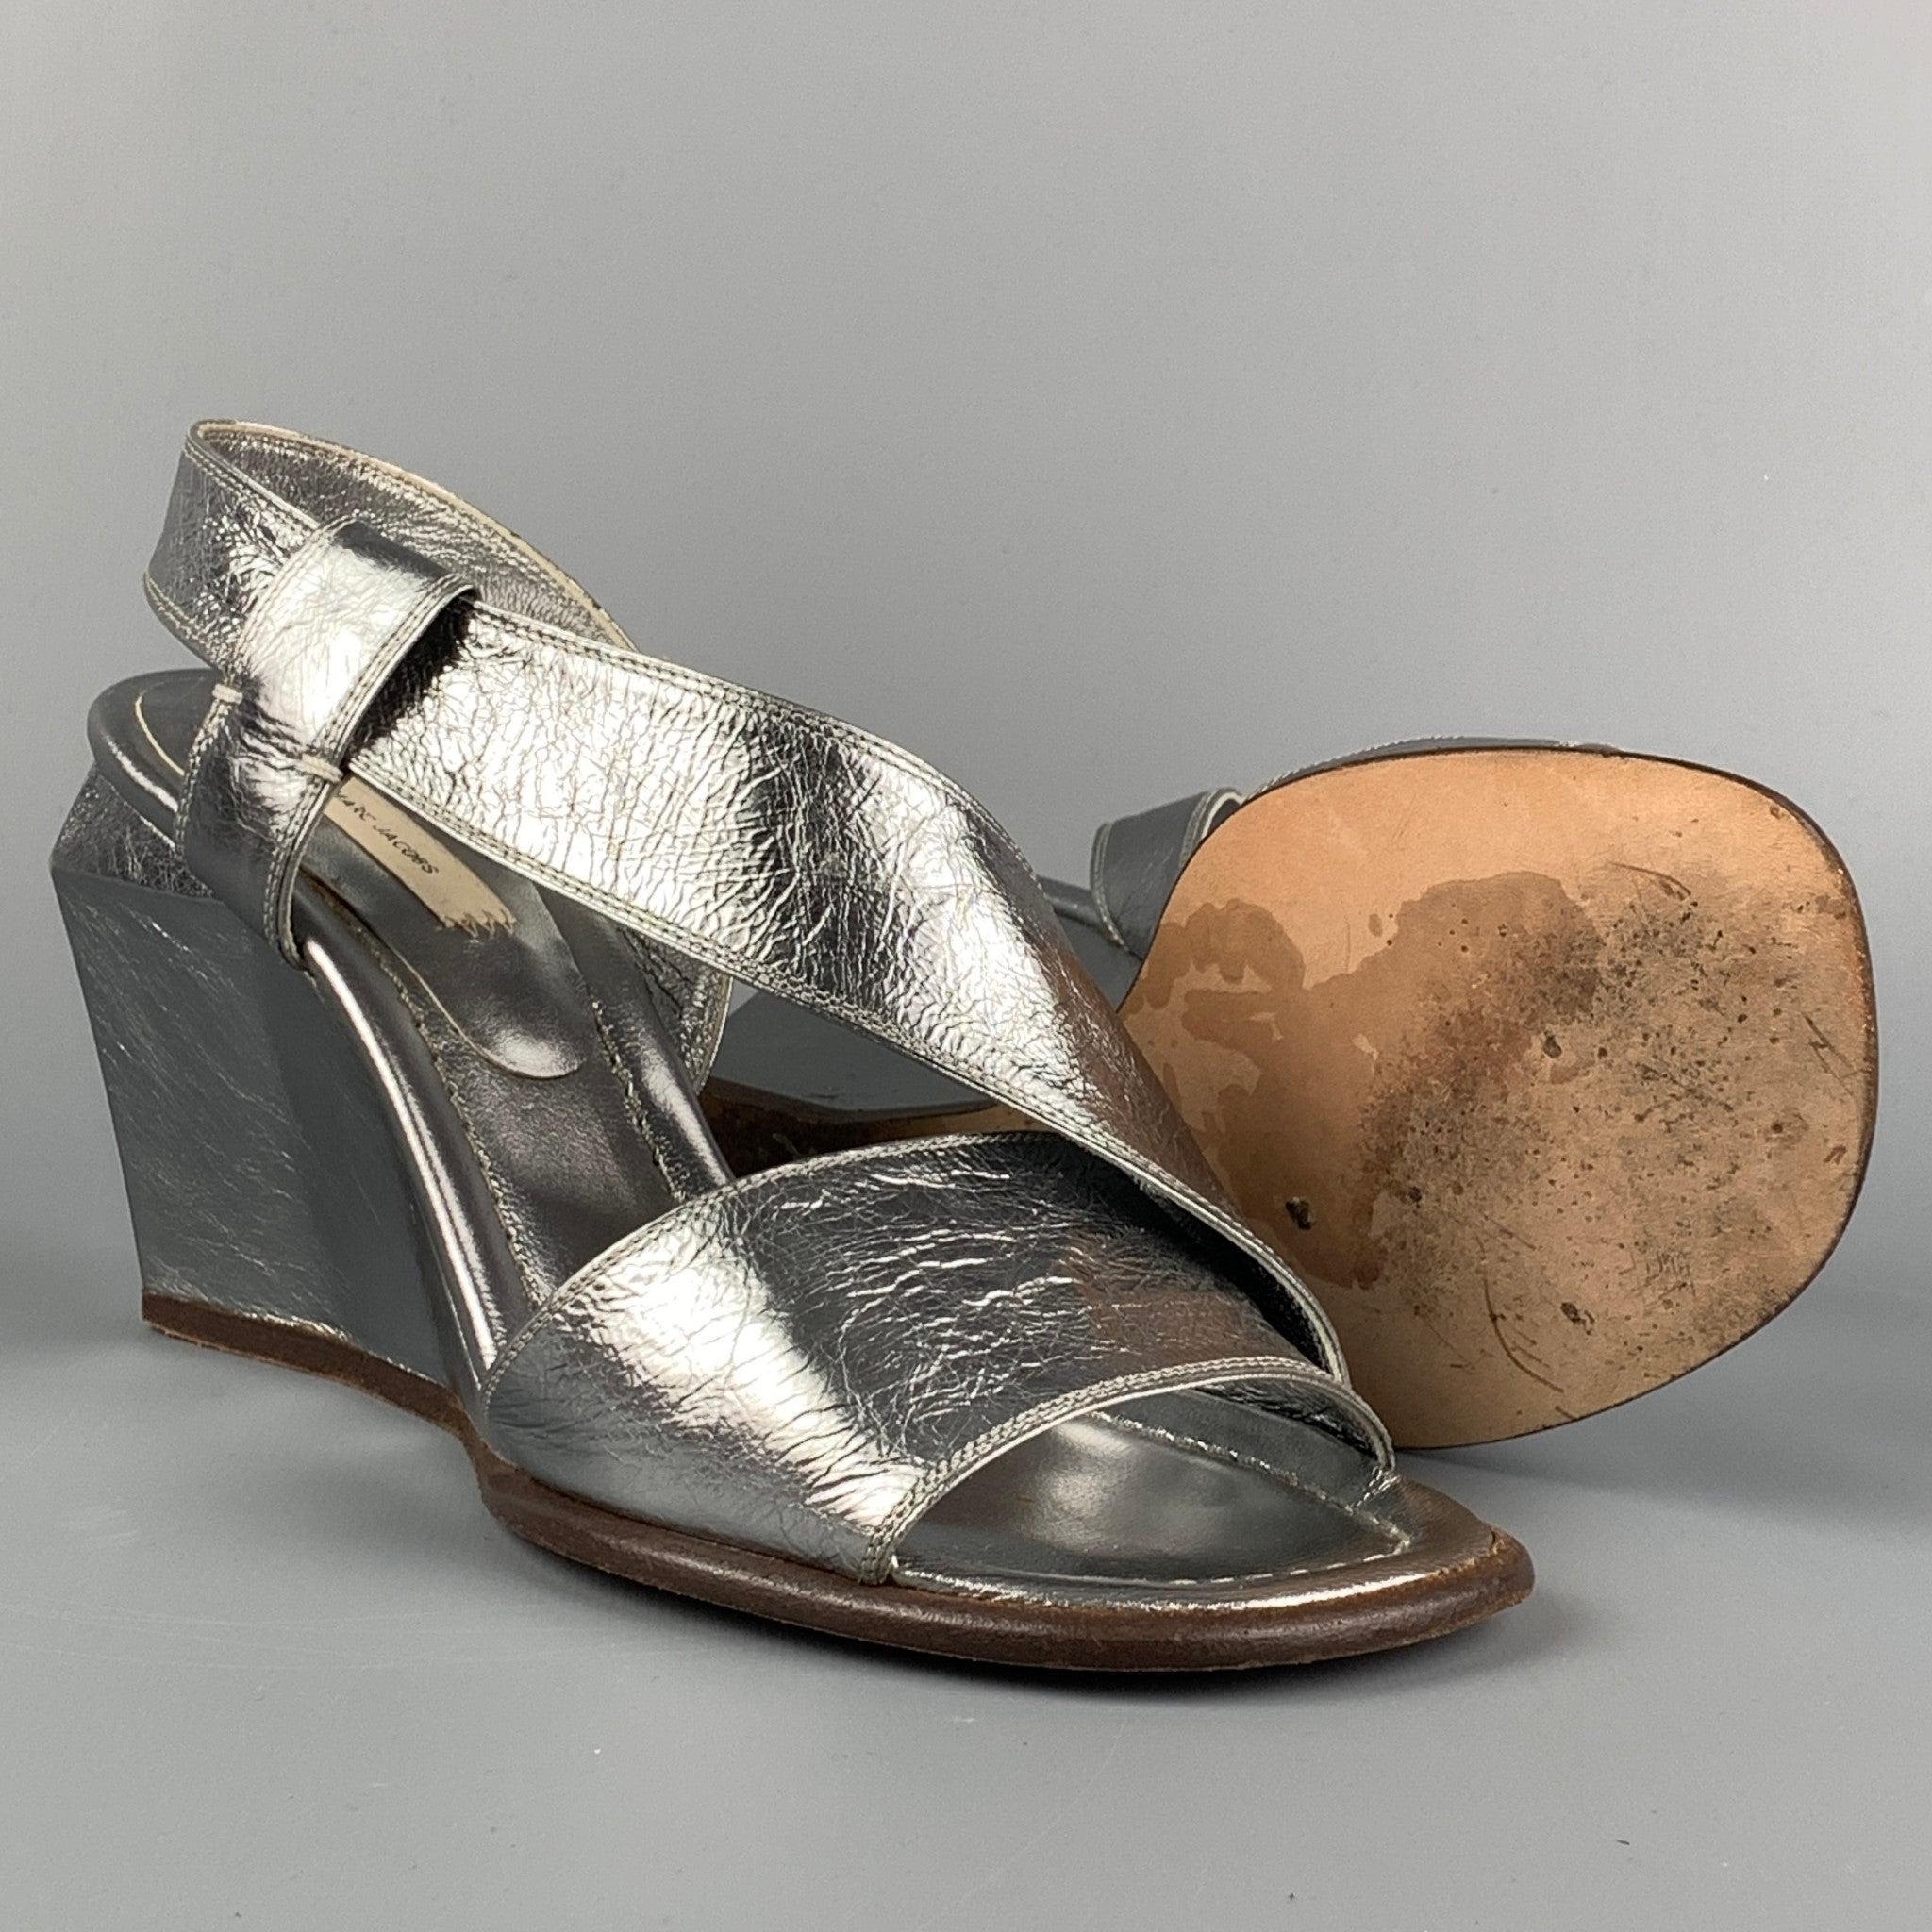 MARC JACOBS Size 7 Silver Leather Wedge Nickel Sandals In Good Condition For Sale In San Francisco, CA